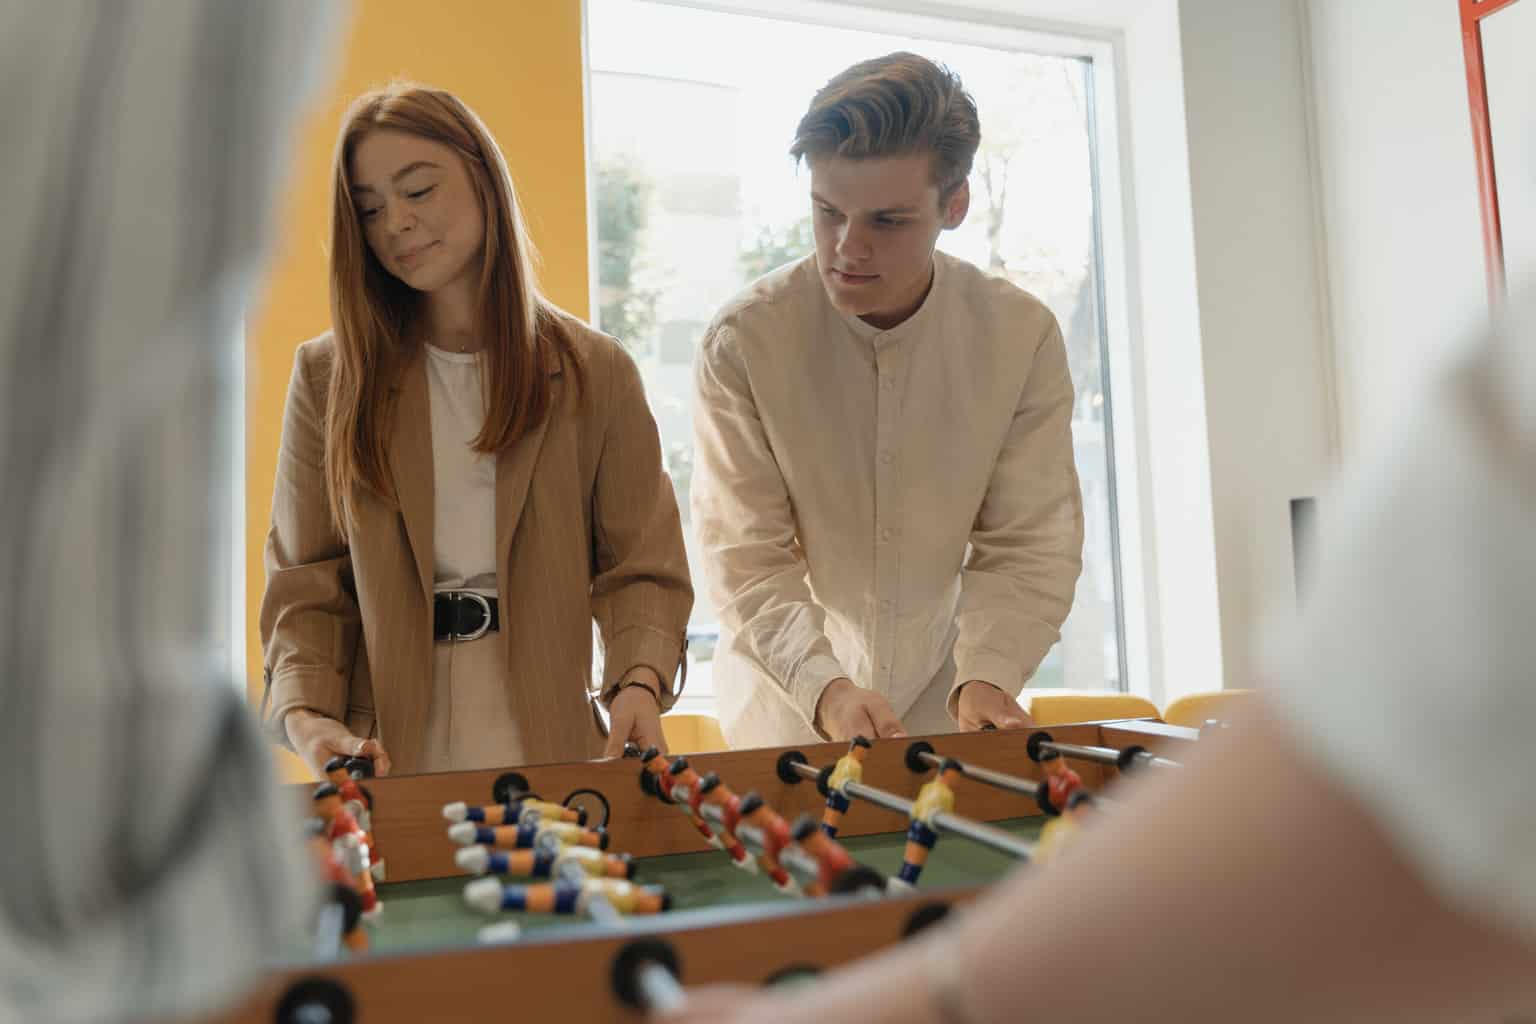 A man and woman playing foosball